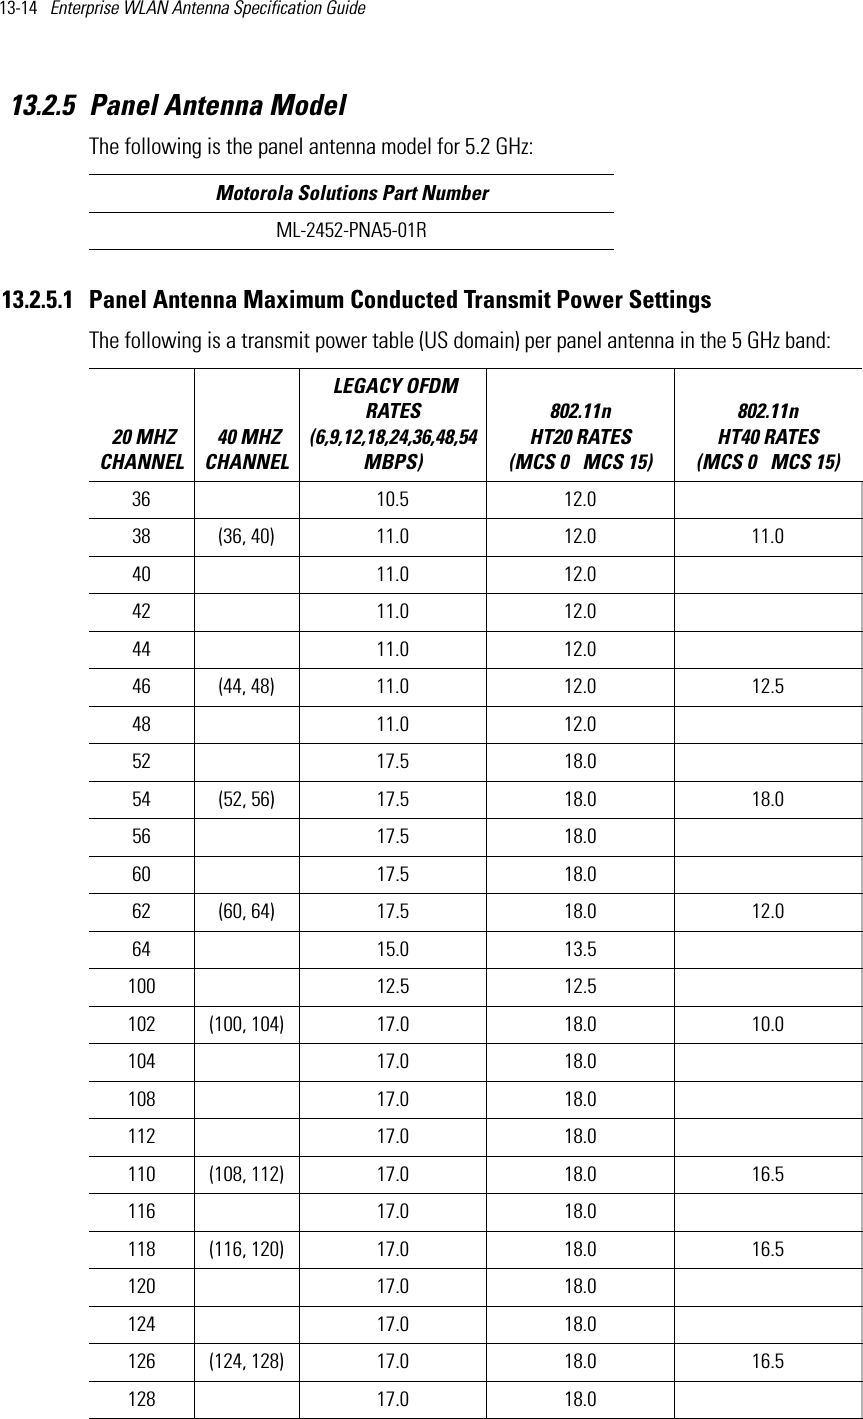 13-14   Enterprise WLAN Antenna Specification Guide 13.2.5 Panel Antenna ModelThe following is the panel antenna model for 5.2 GHz:13.2.5.1 Panel Antenna Maximum Conducted Transmit Power SettingsThe following is a transmit power table (US domain) per panel antenna in the 5 GHz band:Motorola Solutions Part NumberML-2452-PNA5-01R 20 MHZ CHANNEL 40 MHZ CHANNEL LEGACY OFDM RATES (6,9,12,18,24,36,48,54 MBPS) 802.11n HT20 RATES (MCS 0   MCS 15)802.11n HT40 RATES (MCS 0   MCS 15) 36 10.5 12.038 (36, 40) 11.0 12.0 11.040 11.0 12.042 11.0 12.044 11.0 12.046 (44, 48) 11.0 12.0 12.548 11.0 12.052 17.5 18.054 (52, 56) 17.5 18.0 18.056 17.5 18.060 17.5 18.062 (60, 64) 17.5 18.0 12.064 15.0 13.5100 12.5 12.5102 (100, 104) 17.0 18.0 10.0104 17.0 18.0108 17.0 18.0112 17.0 18.0110 (108, 112) 17.0 18.0 16.5116 17.0 18.0118 (116, 120) 17.0 18.0 16.5120 17.0 18.0124 17.0 18.0126 (124, 128) 17.0 18.0 16.5128 17.0 18.0